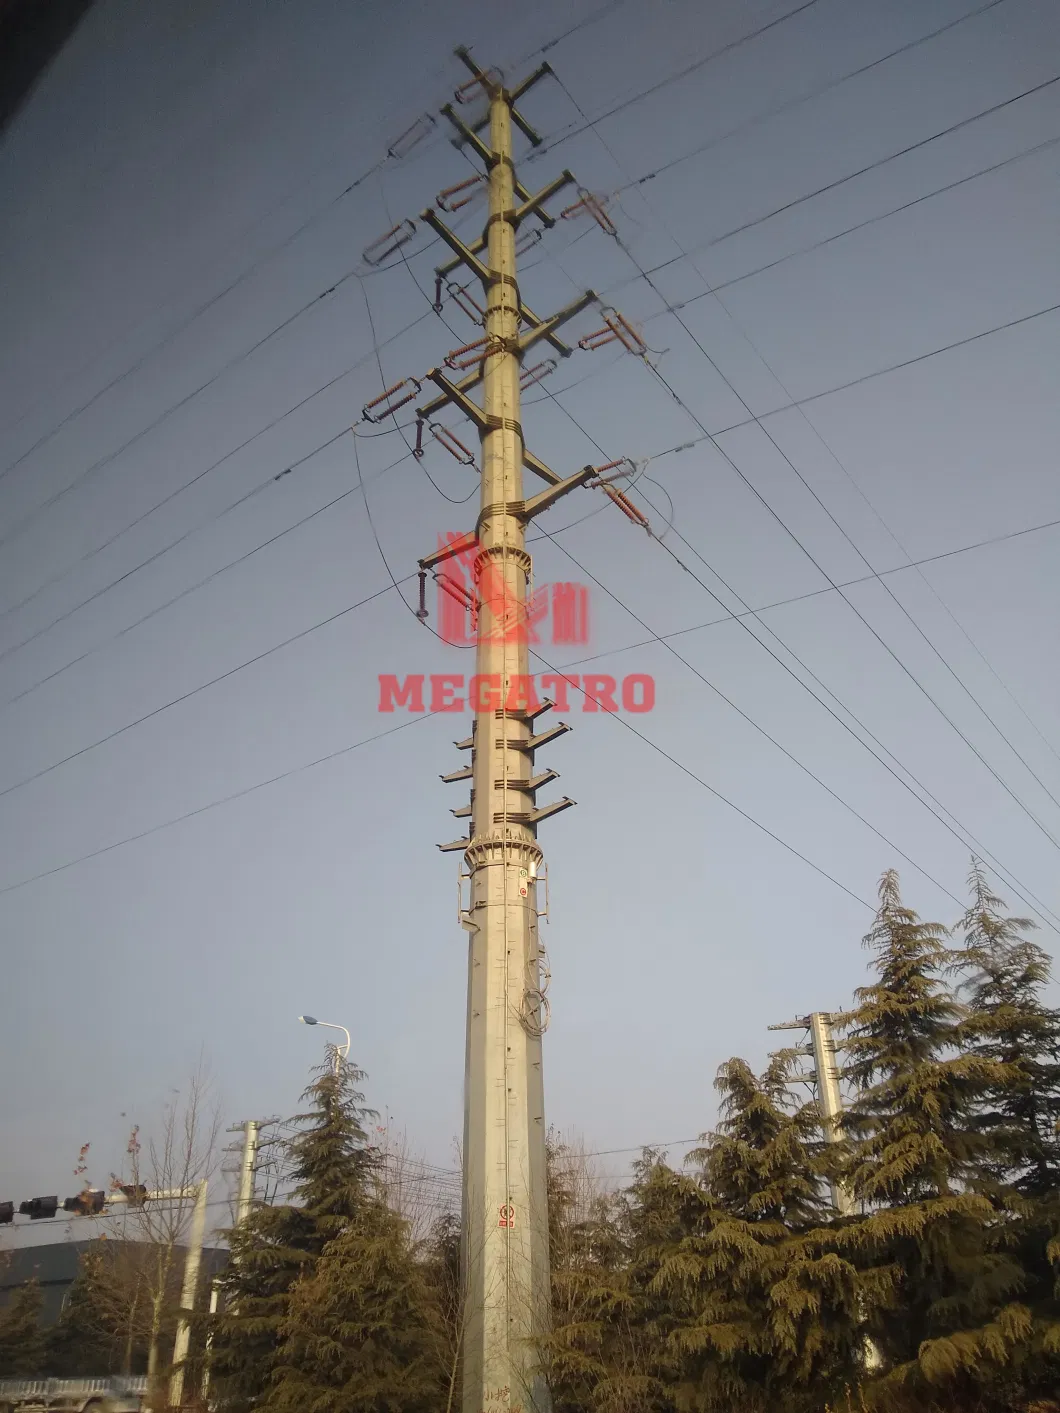 Megatro Four Circuit 110kv Lines Style with Transmission Steel Monopole Towers